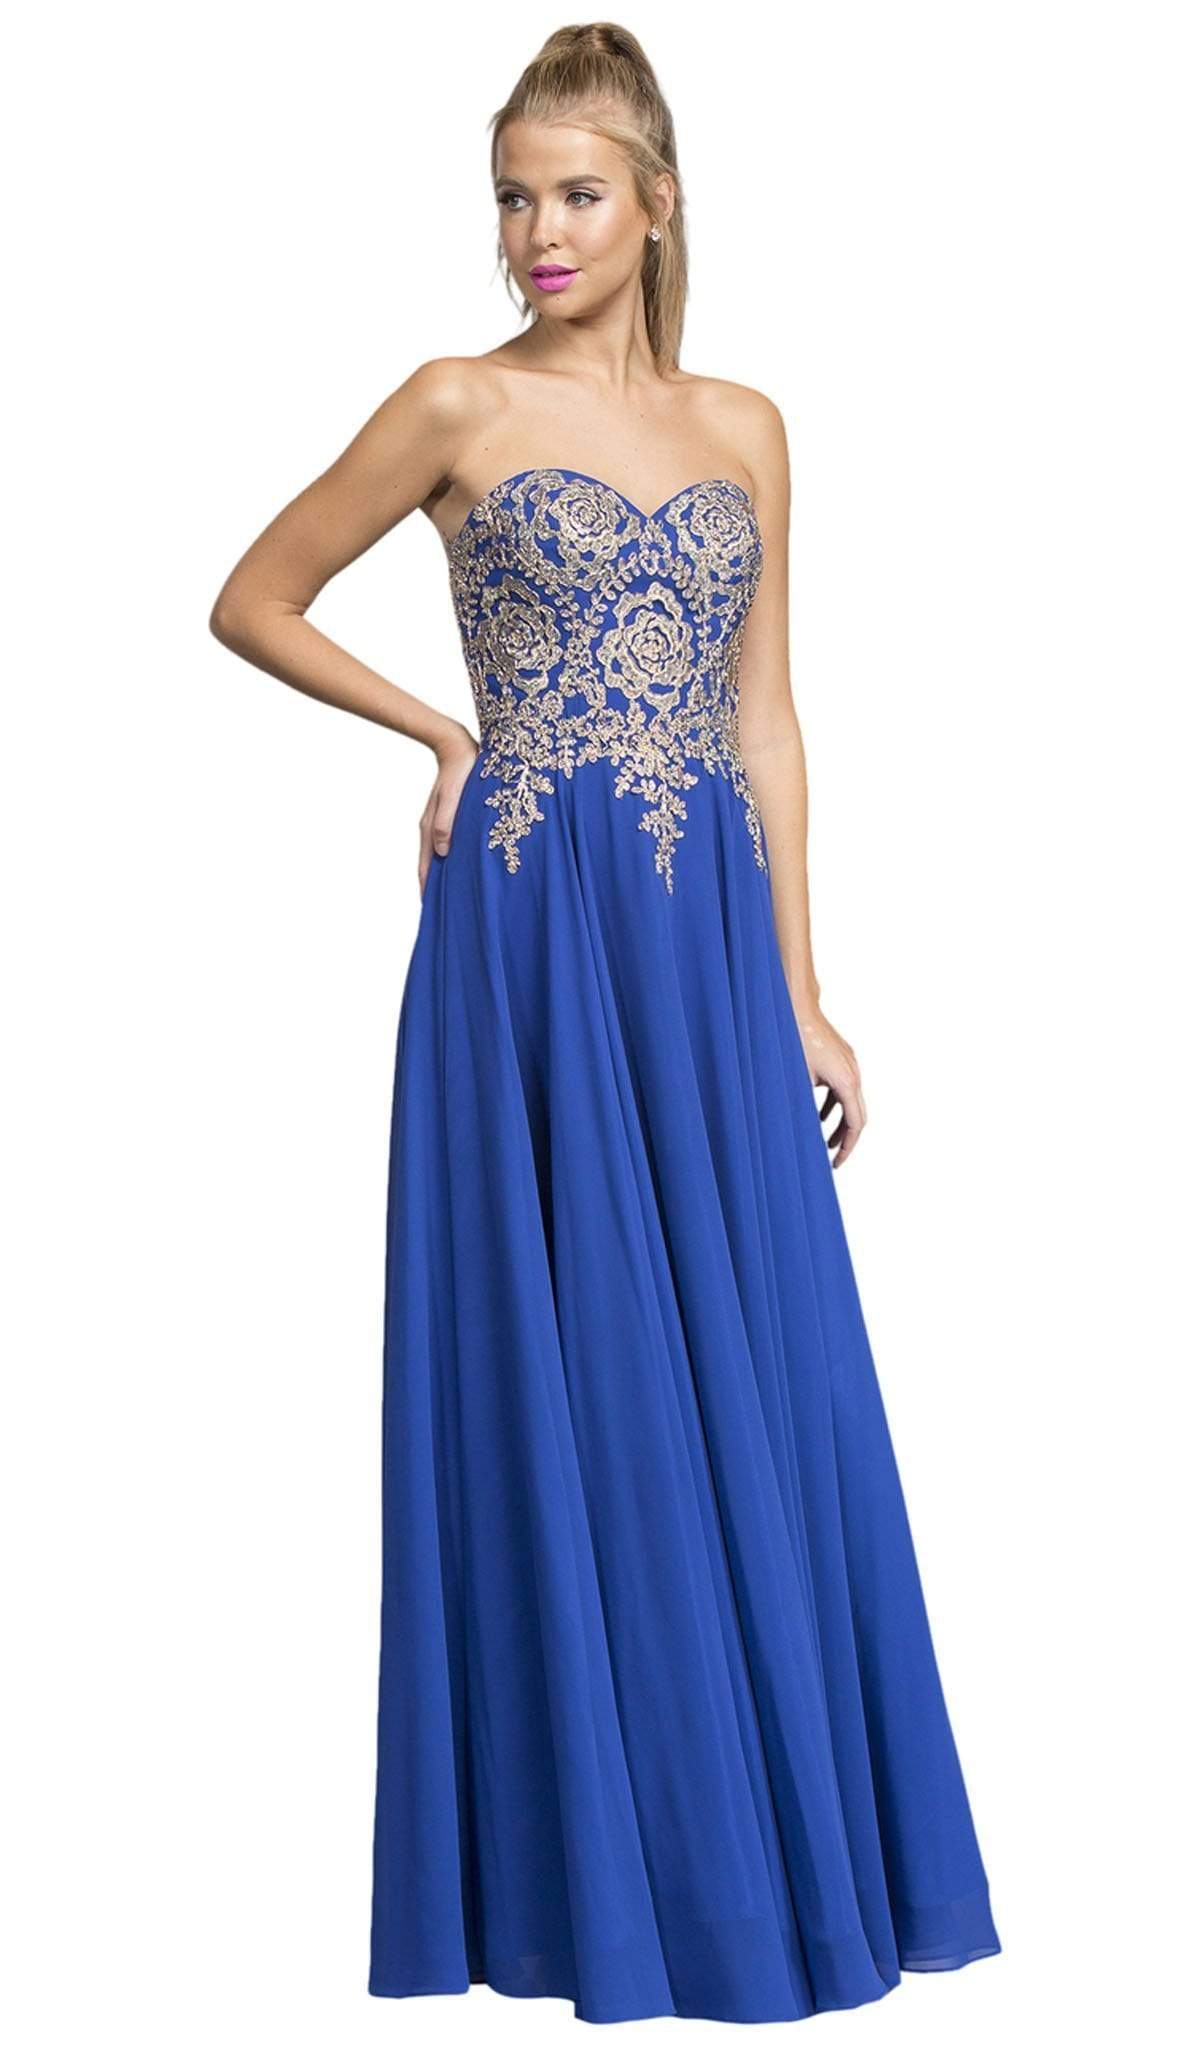 Image of Aspeed Design - Strapless Applique Sweetheart Prom Dress